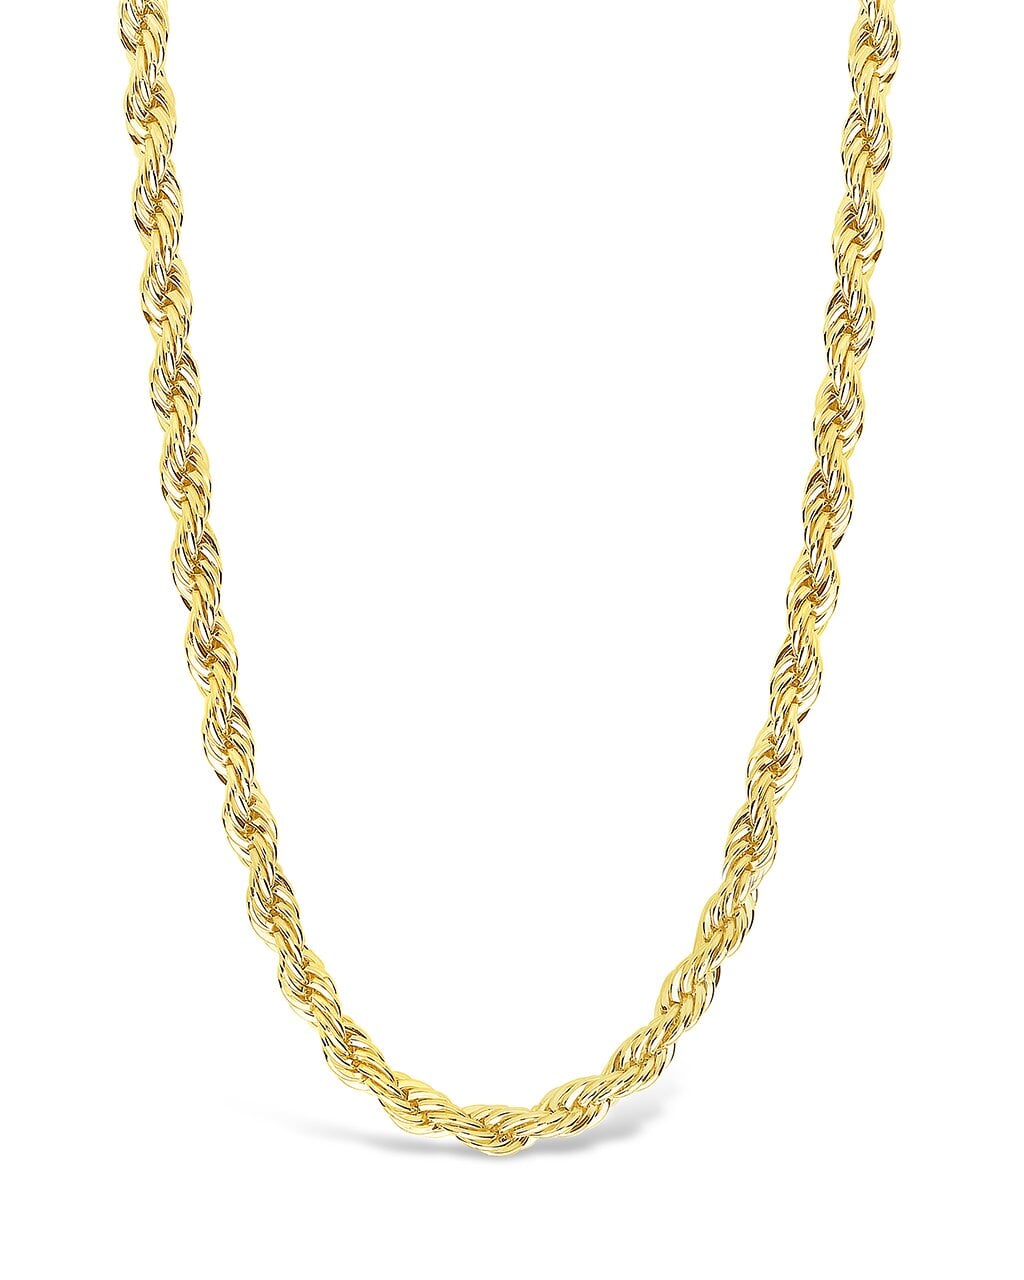 Men's Rope Twist Chain Necklace Necklace Sterling Forever Gold 